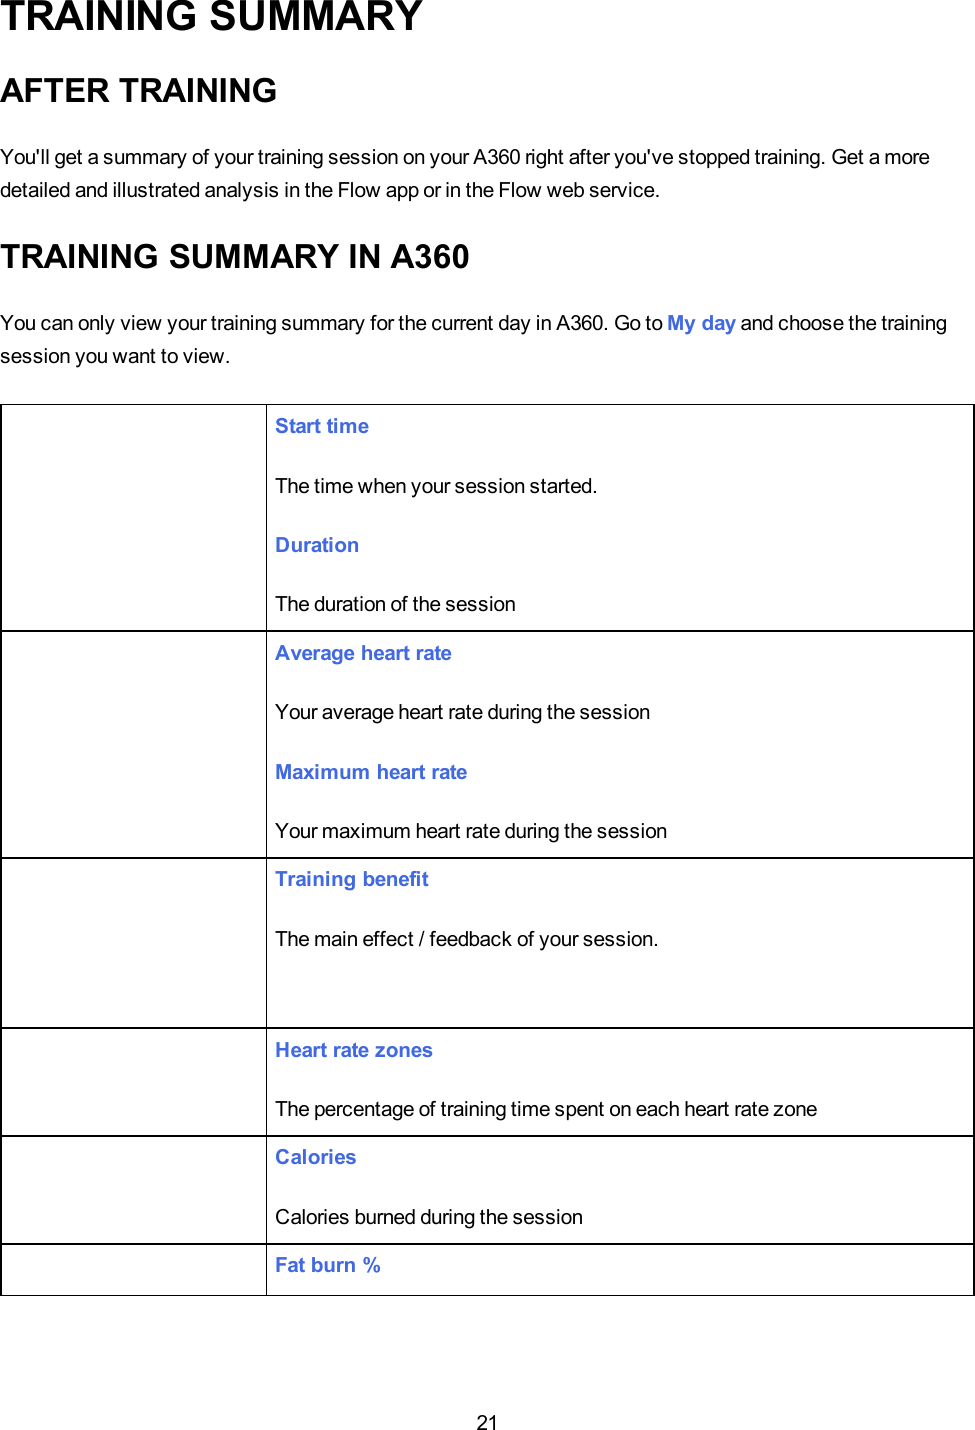 21TRAINING SUMMARYAFTER TRAININGYou&apos;ll get a summary of your training session on your A360 right after you&apos;ve stopped training. Get a moredetailed and illustrated analysis in the Flow app or in the Flow web service.TRAINING SUMMARY IN A360You can only view your training summary for the current day in A360. Go to My day and choose the trainingsession you want to view.Start timeThe time when your session started.DurationThe duration of the sessionAverage heart rateYour average heart rate during the sessionMaximum heart rateYour maximum heart rate during the sessionTraining benefitThe main effect / feedback of your session.Heart rate zonesThe percentage of training time spent on each heart rate zoneCaloriesCalories burned during the sessionFat burn %